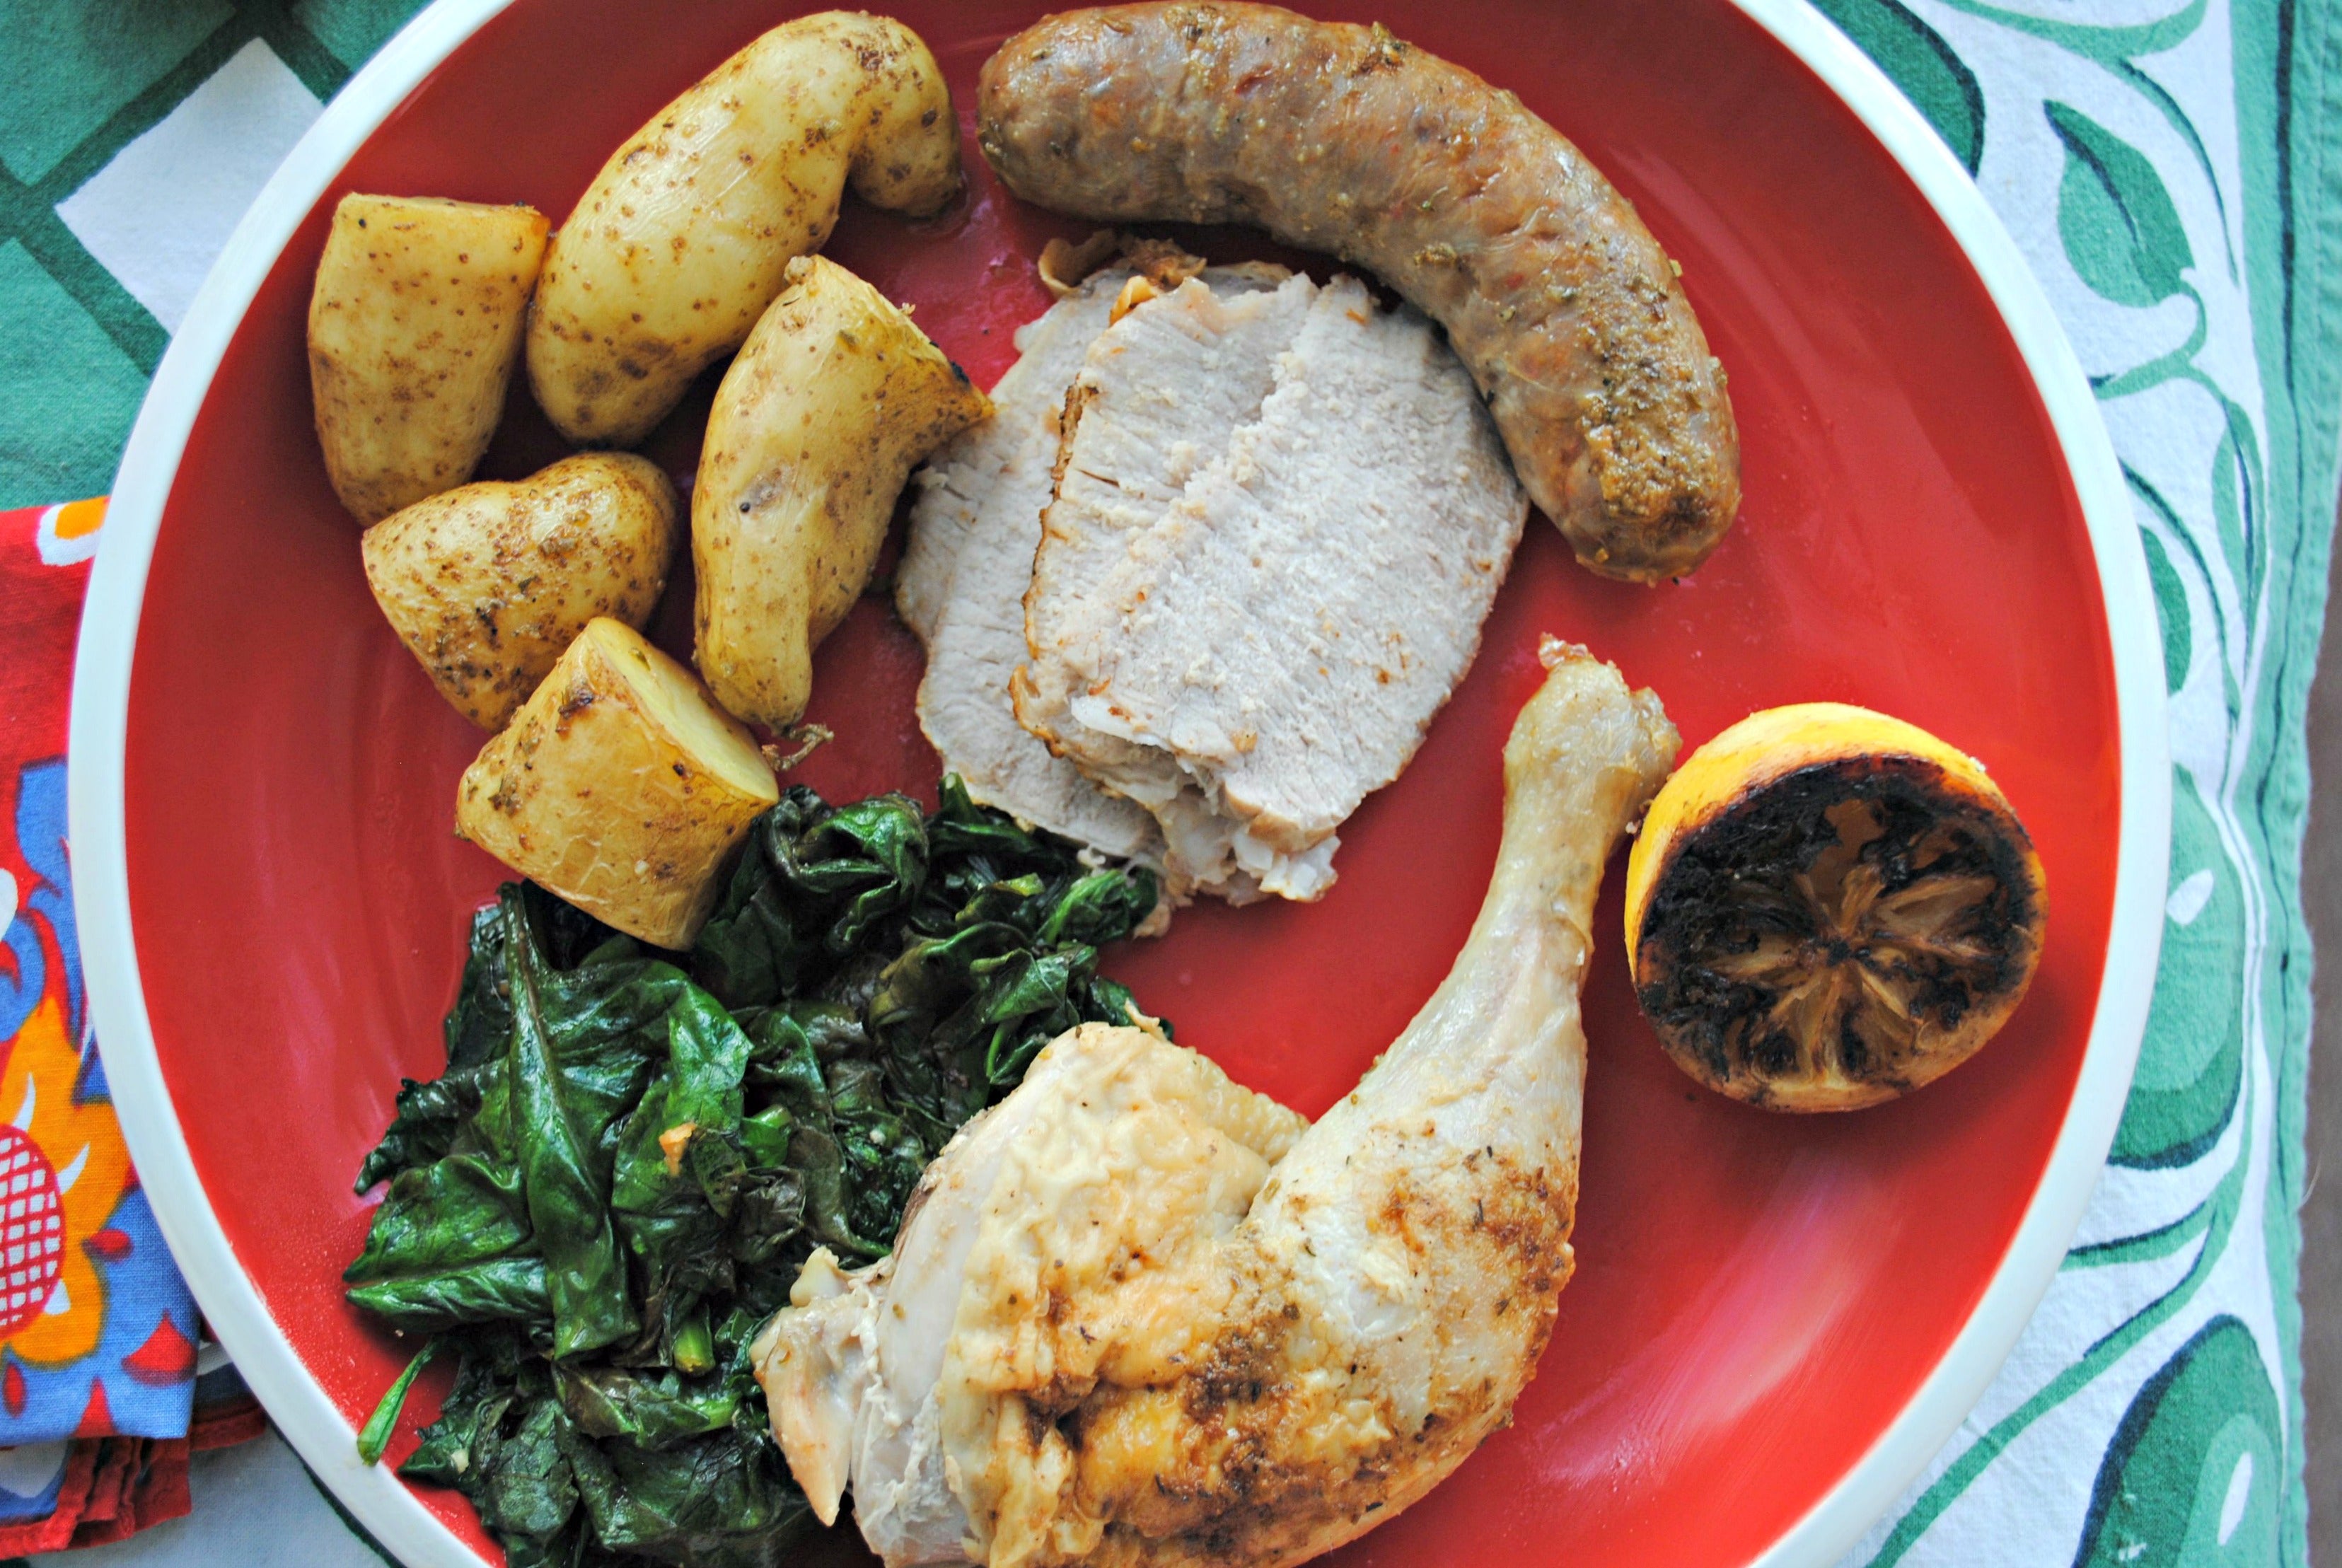 Roasted Pork Chicken and Sausage with Wilted Greens